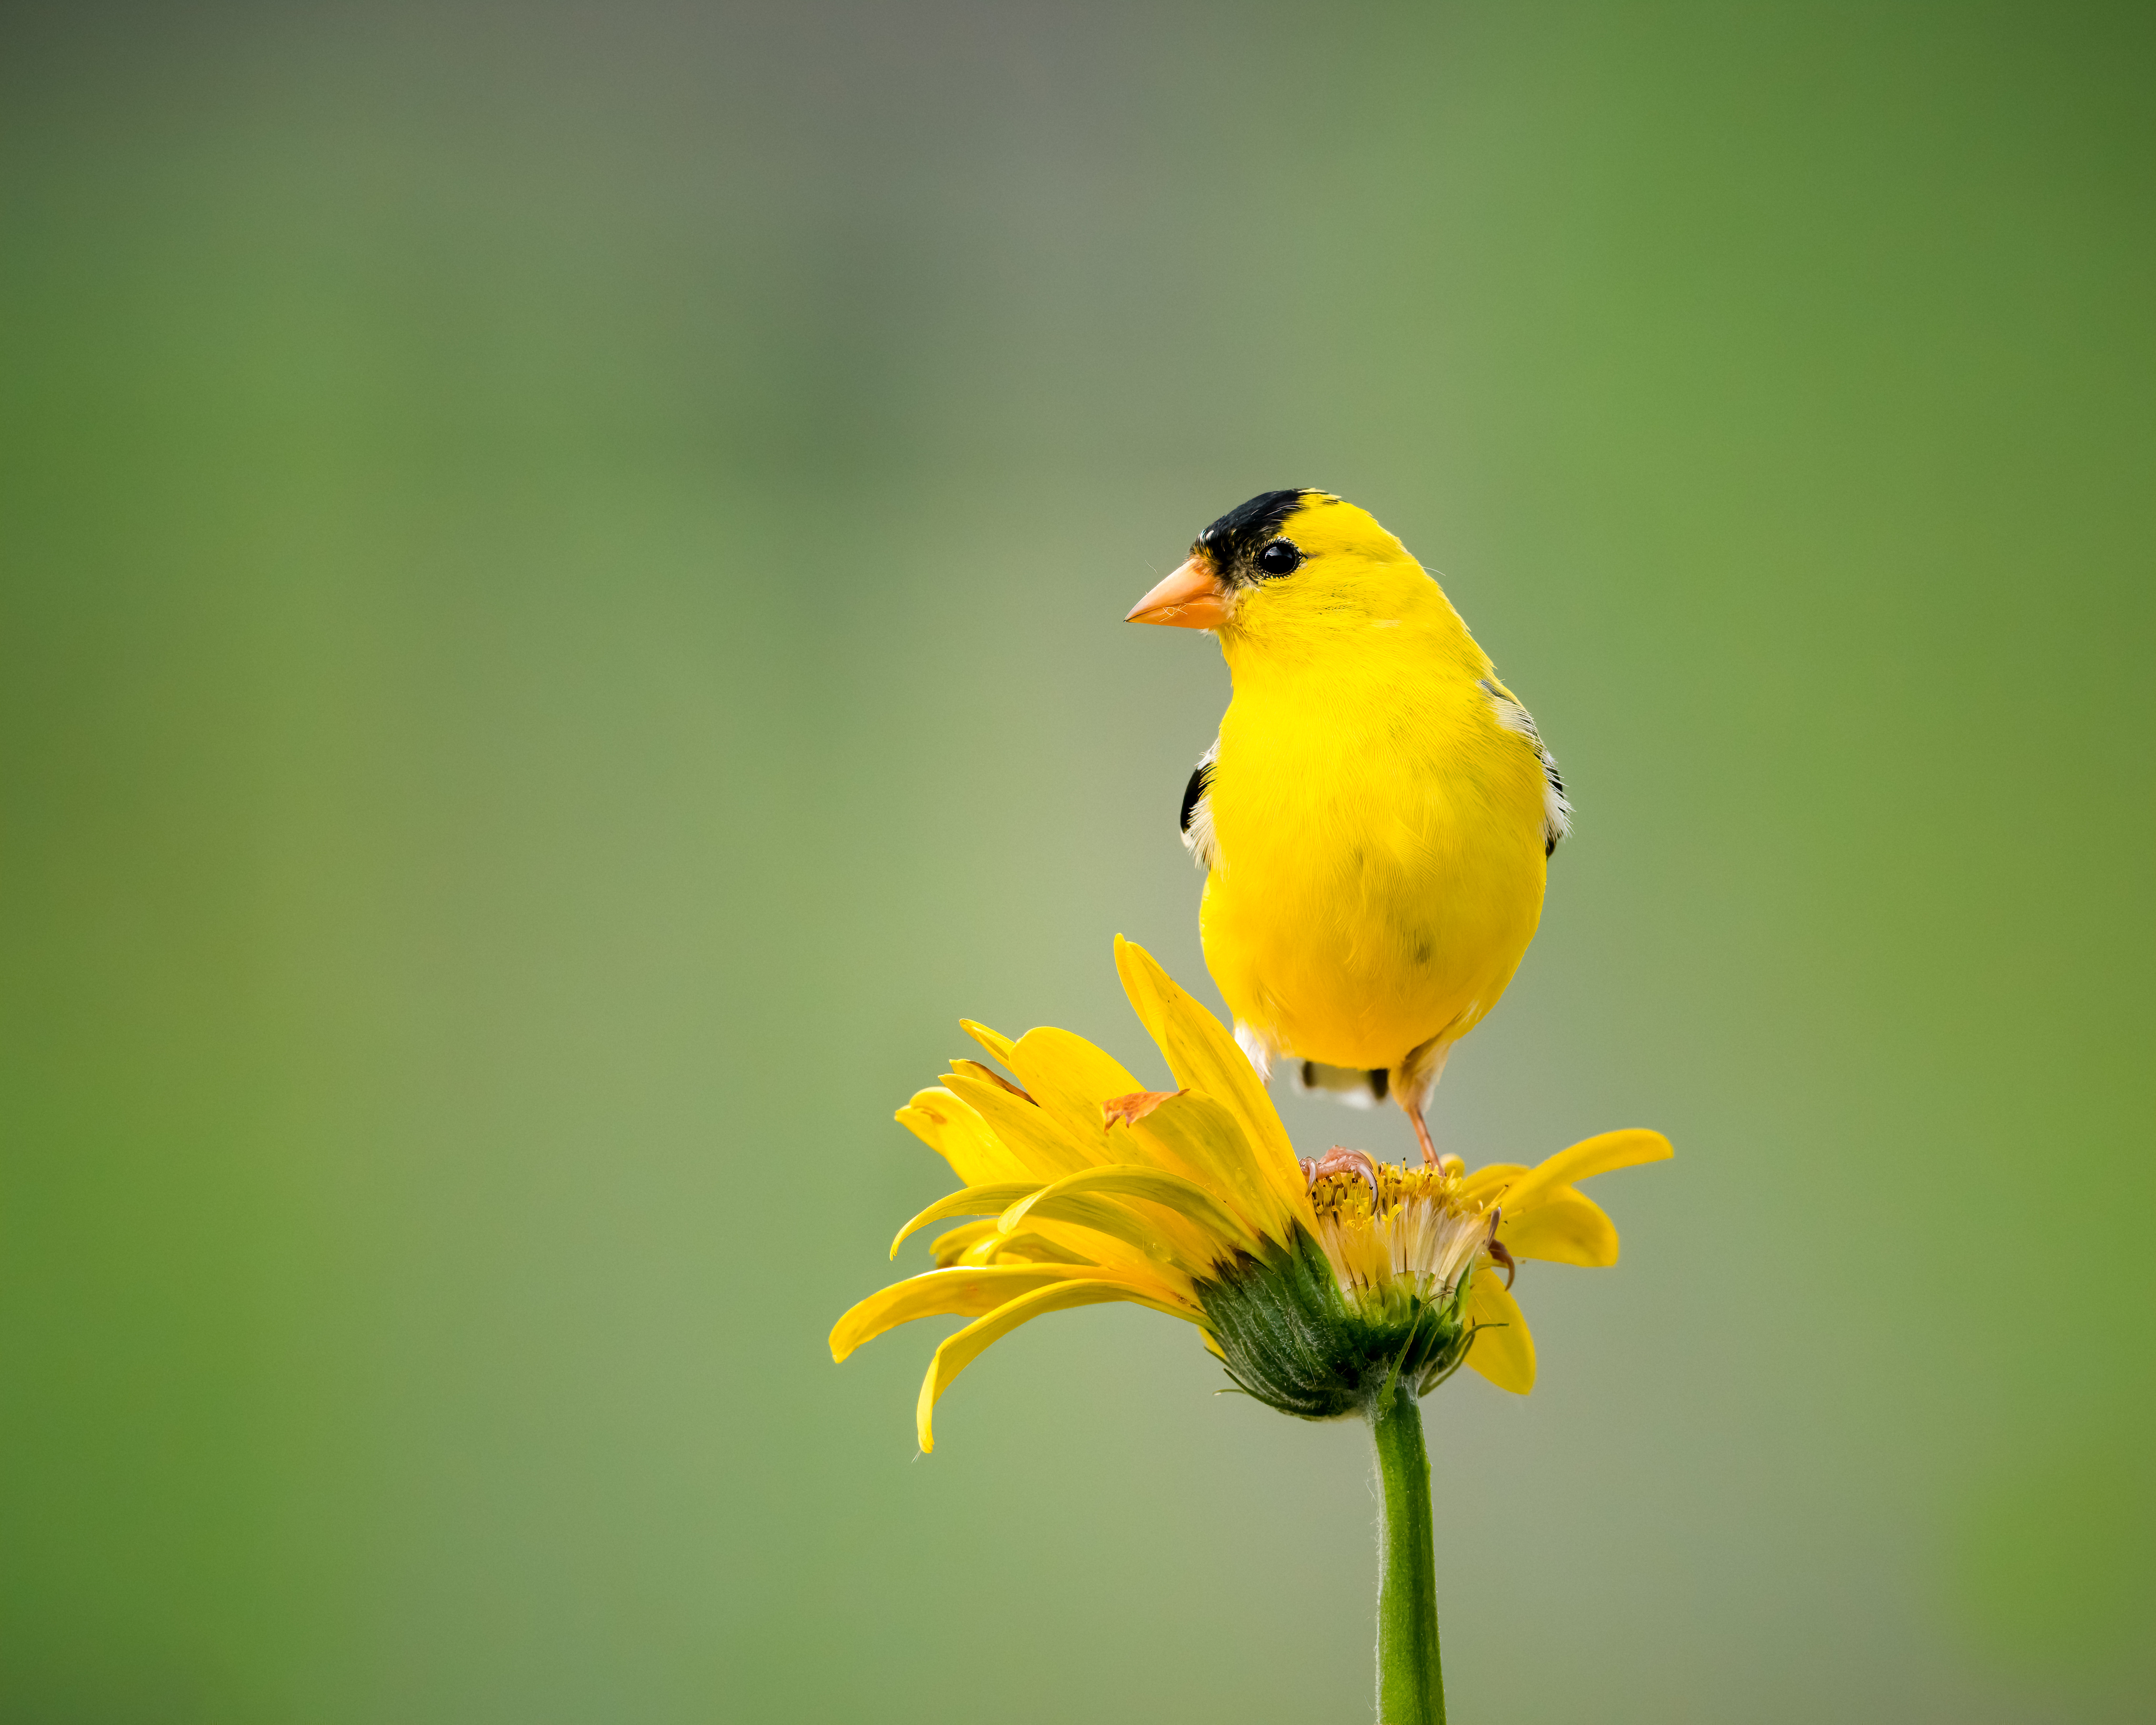 Photo of a yellow bird on a yellow flower.